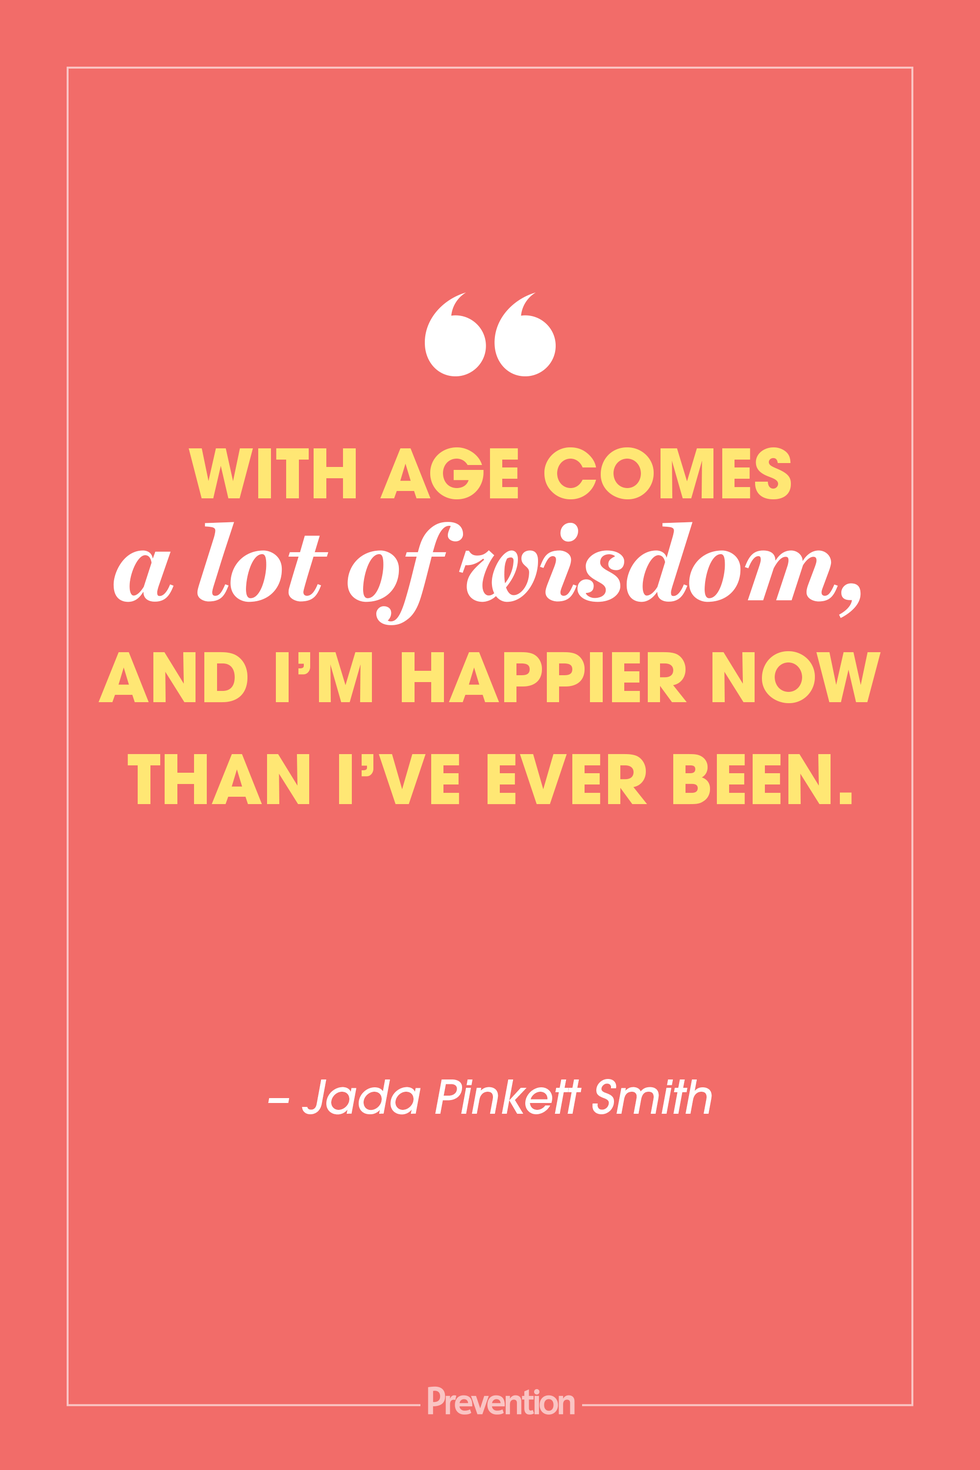 35 Best Age Quotes - Inspiring Celebrity Quotes About Aging